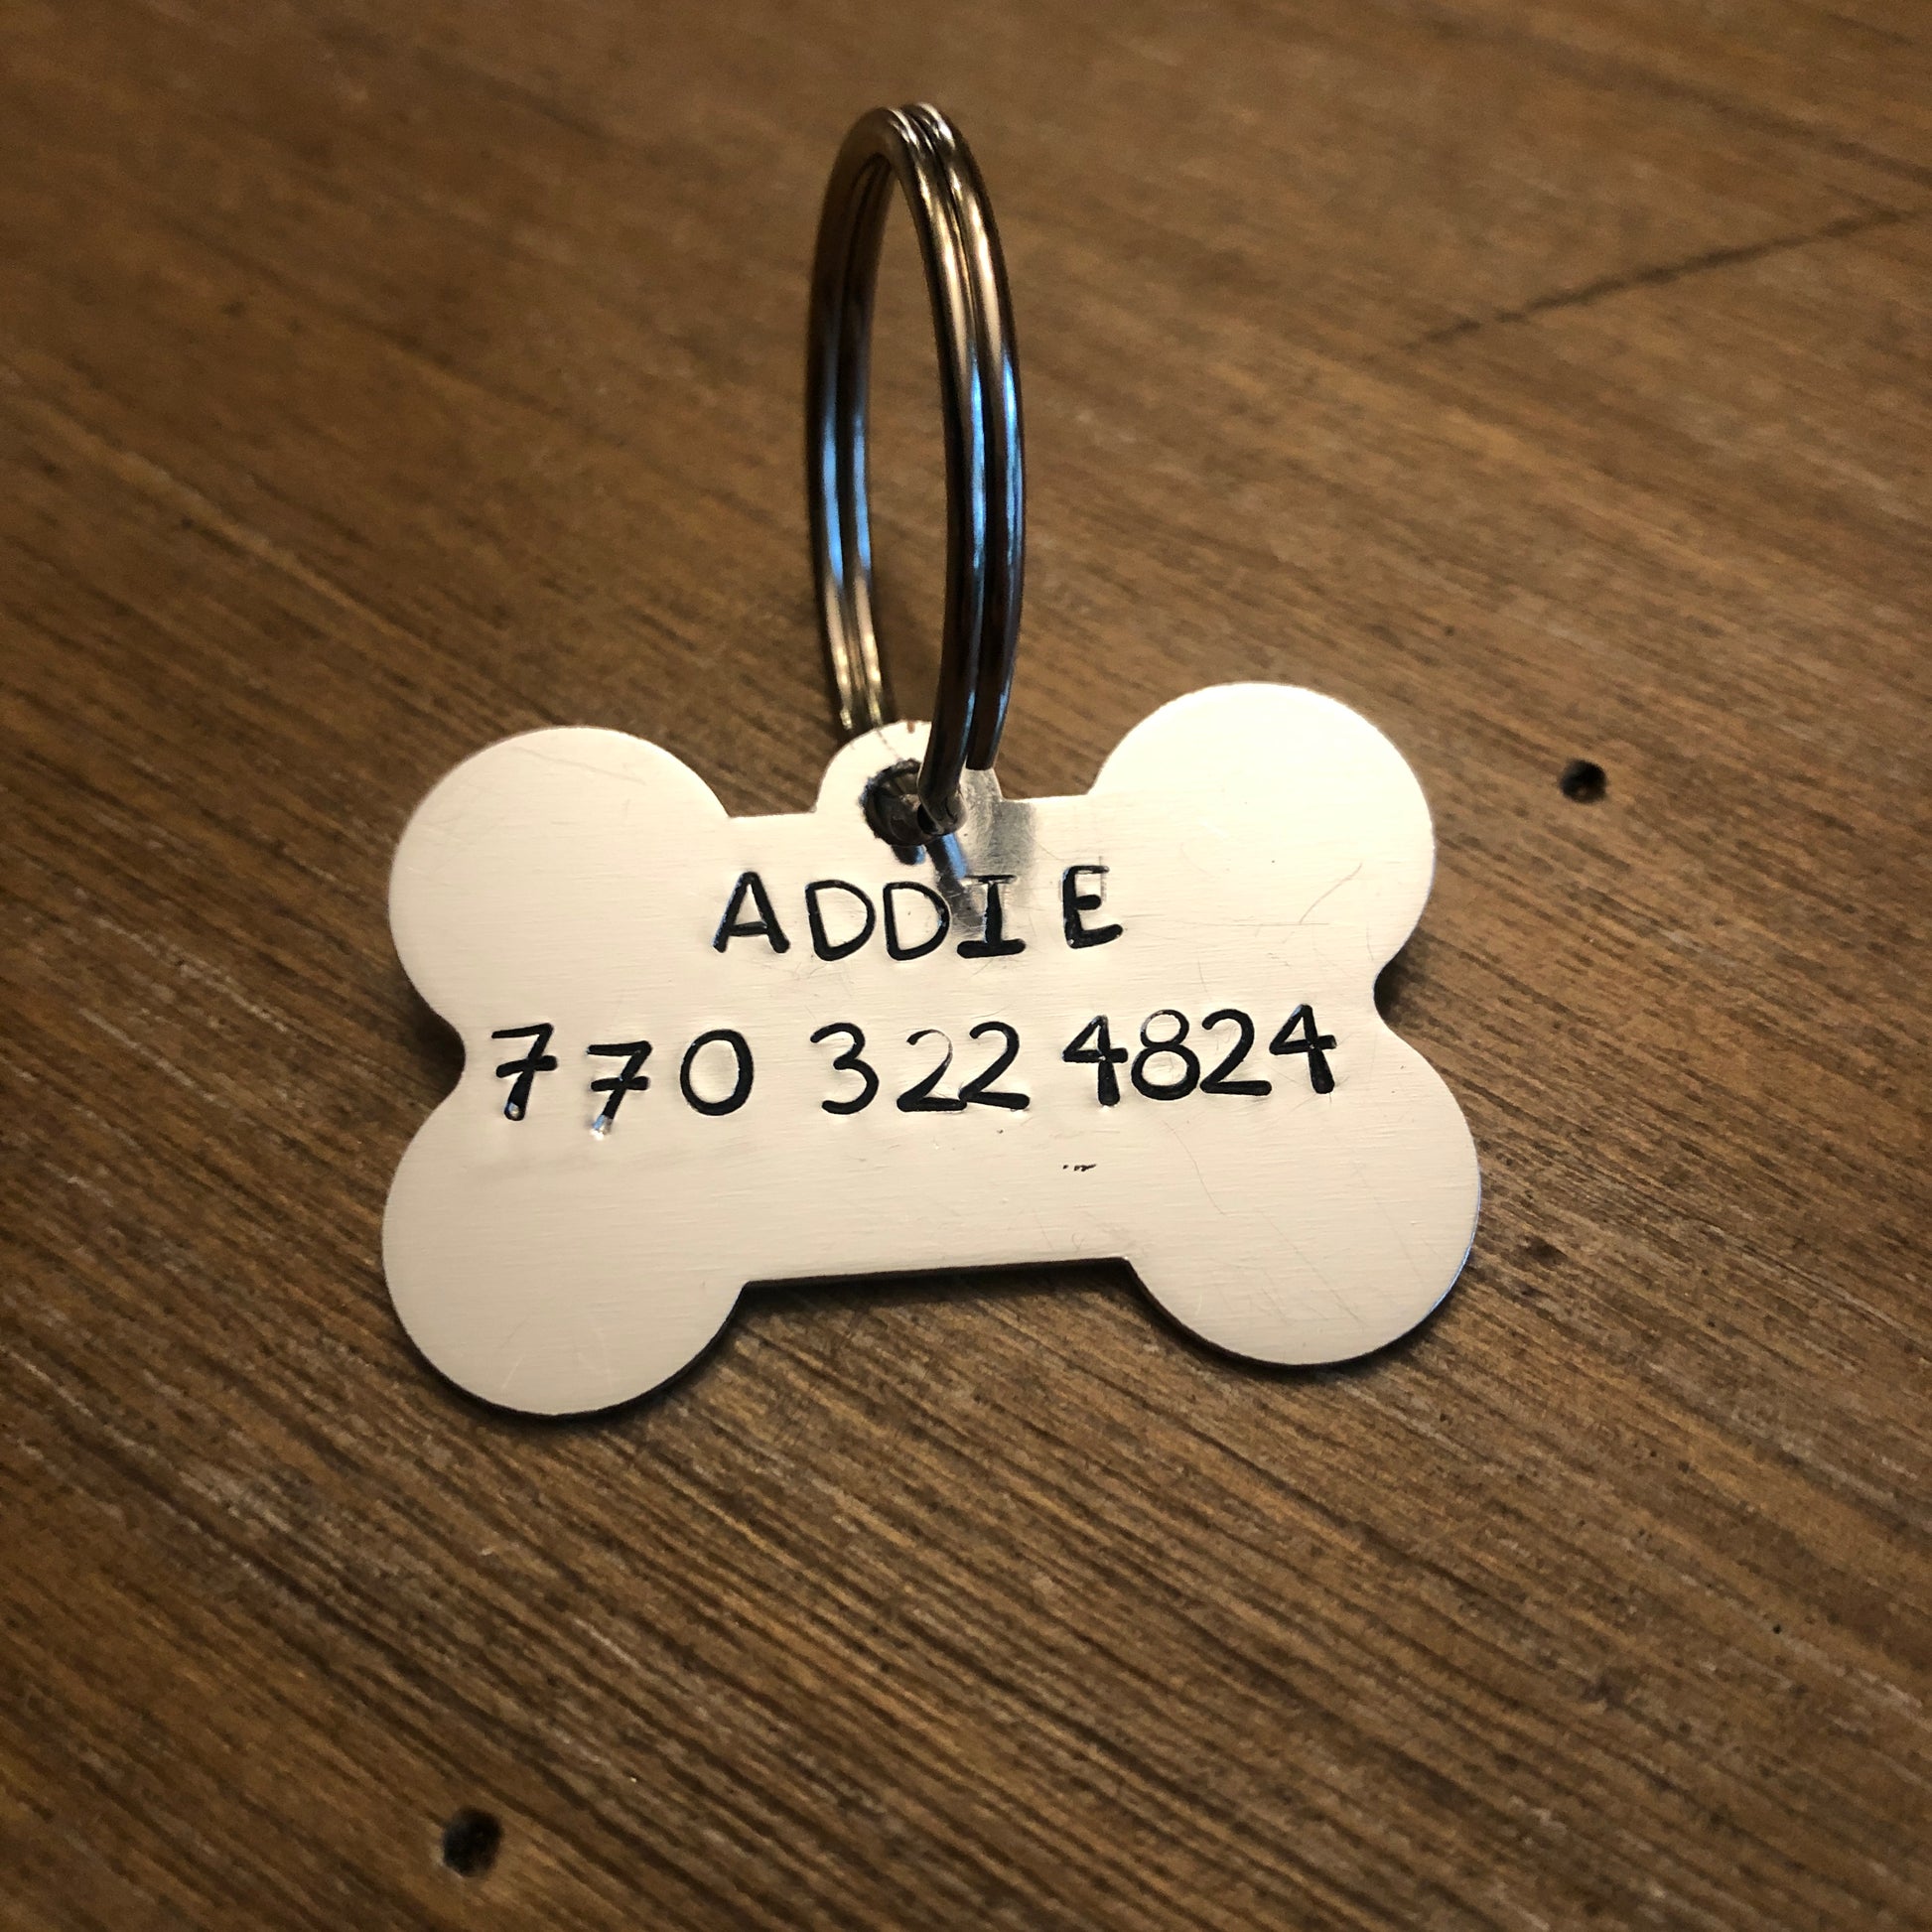 Dog tag with name and phone number